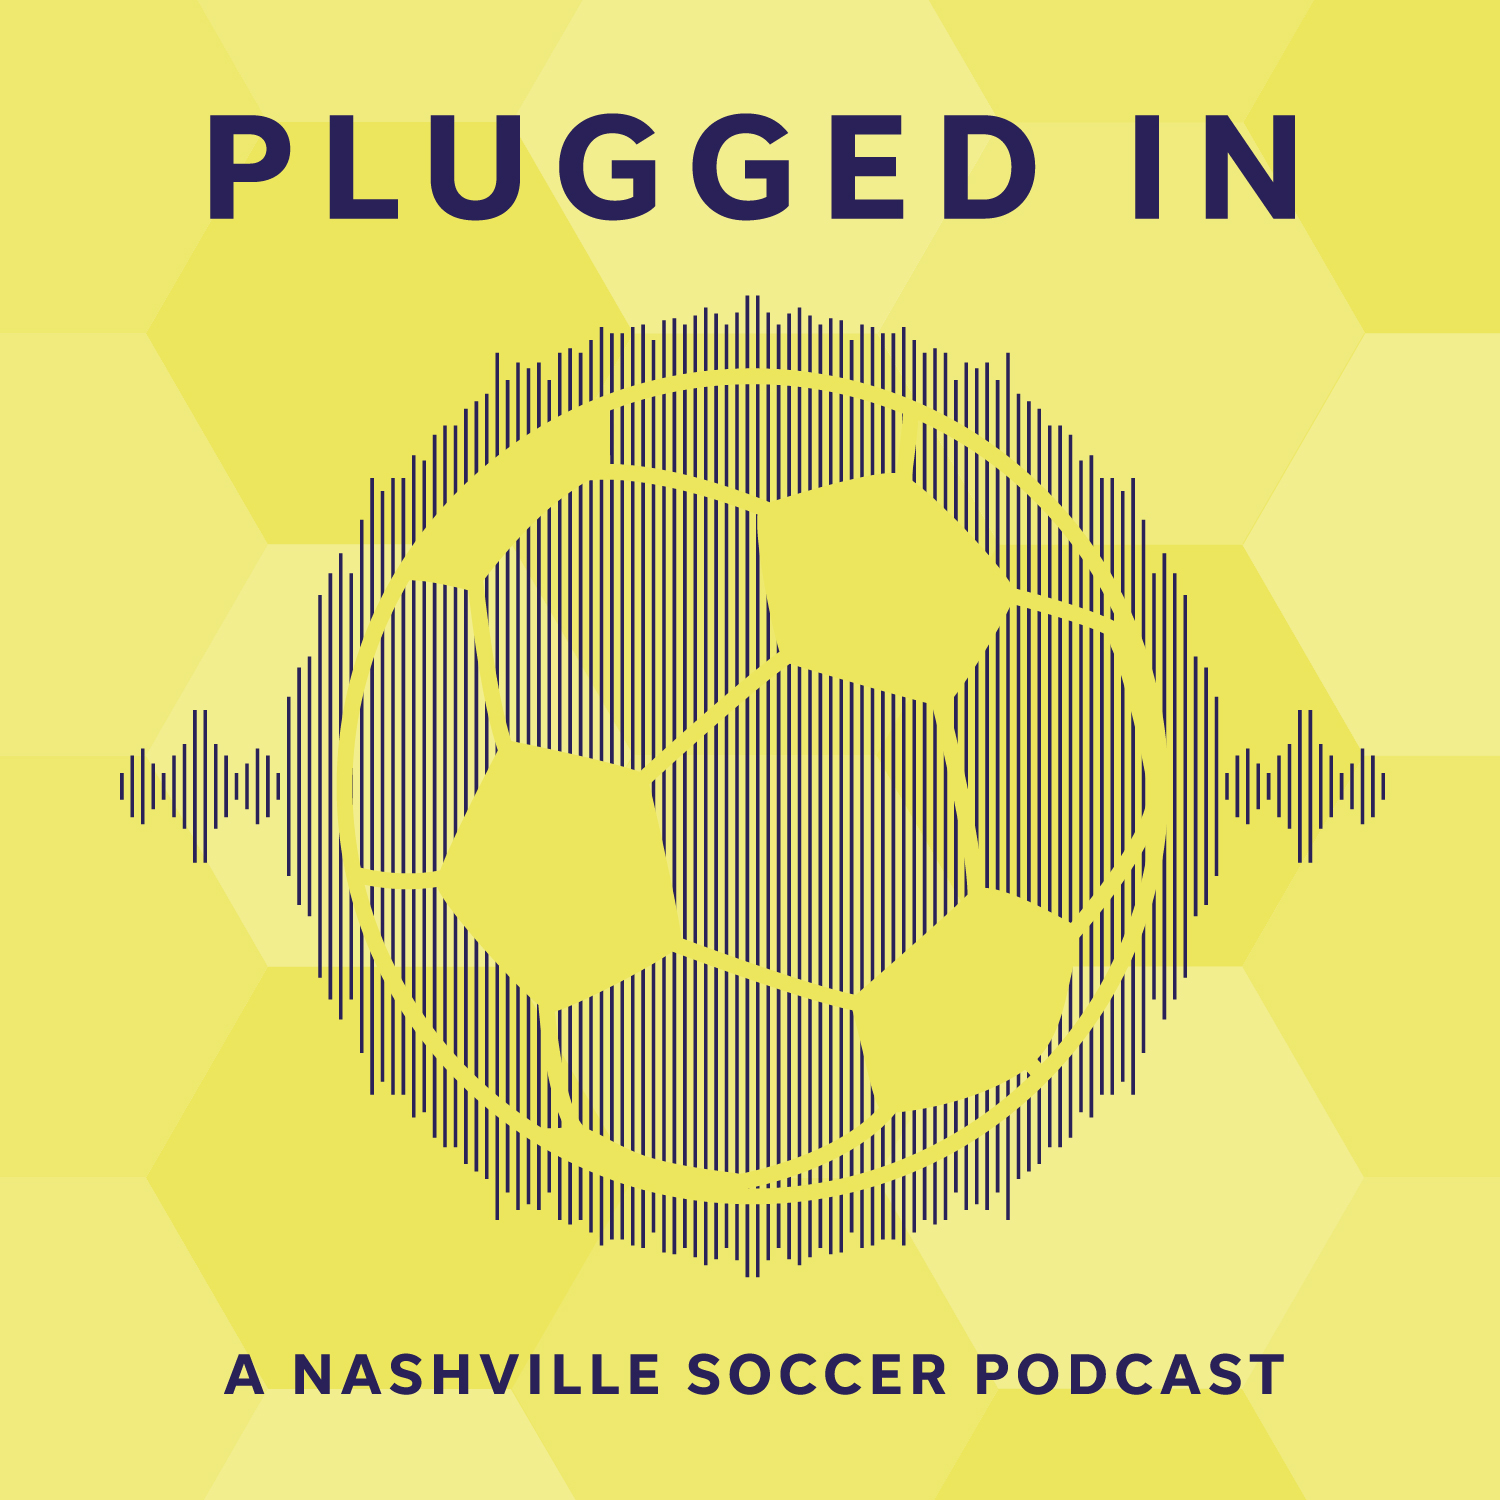 Nashville SC's first win of 2021, and some encouraging signs emerge